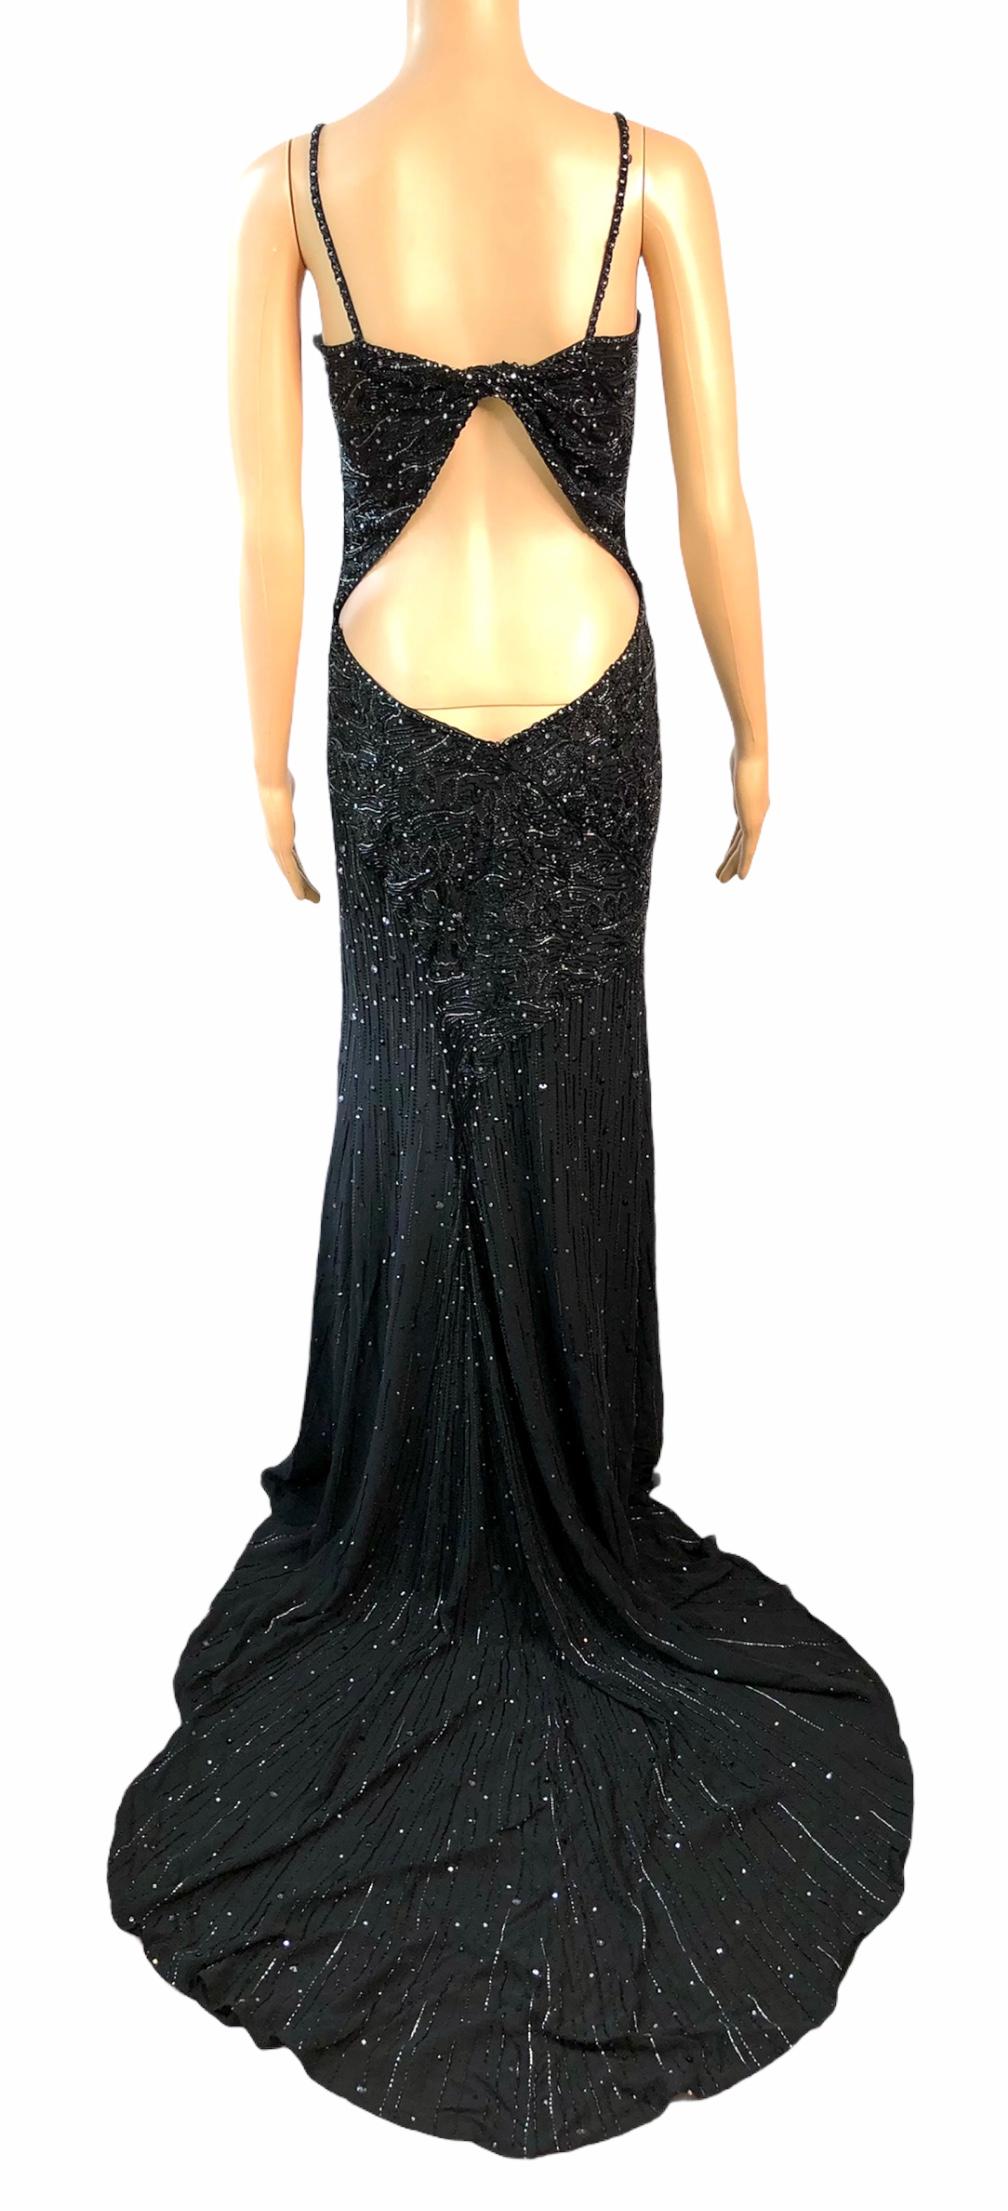 Atelier Versace Haute Couture F/W 1998 Crystal Embellished Cutout Train Gown For Sale 4